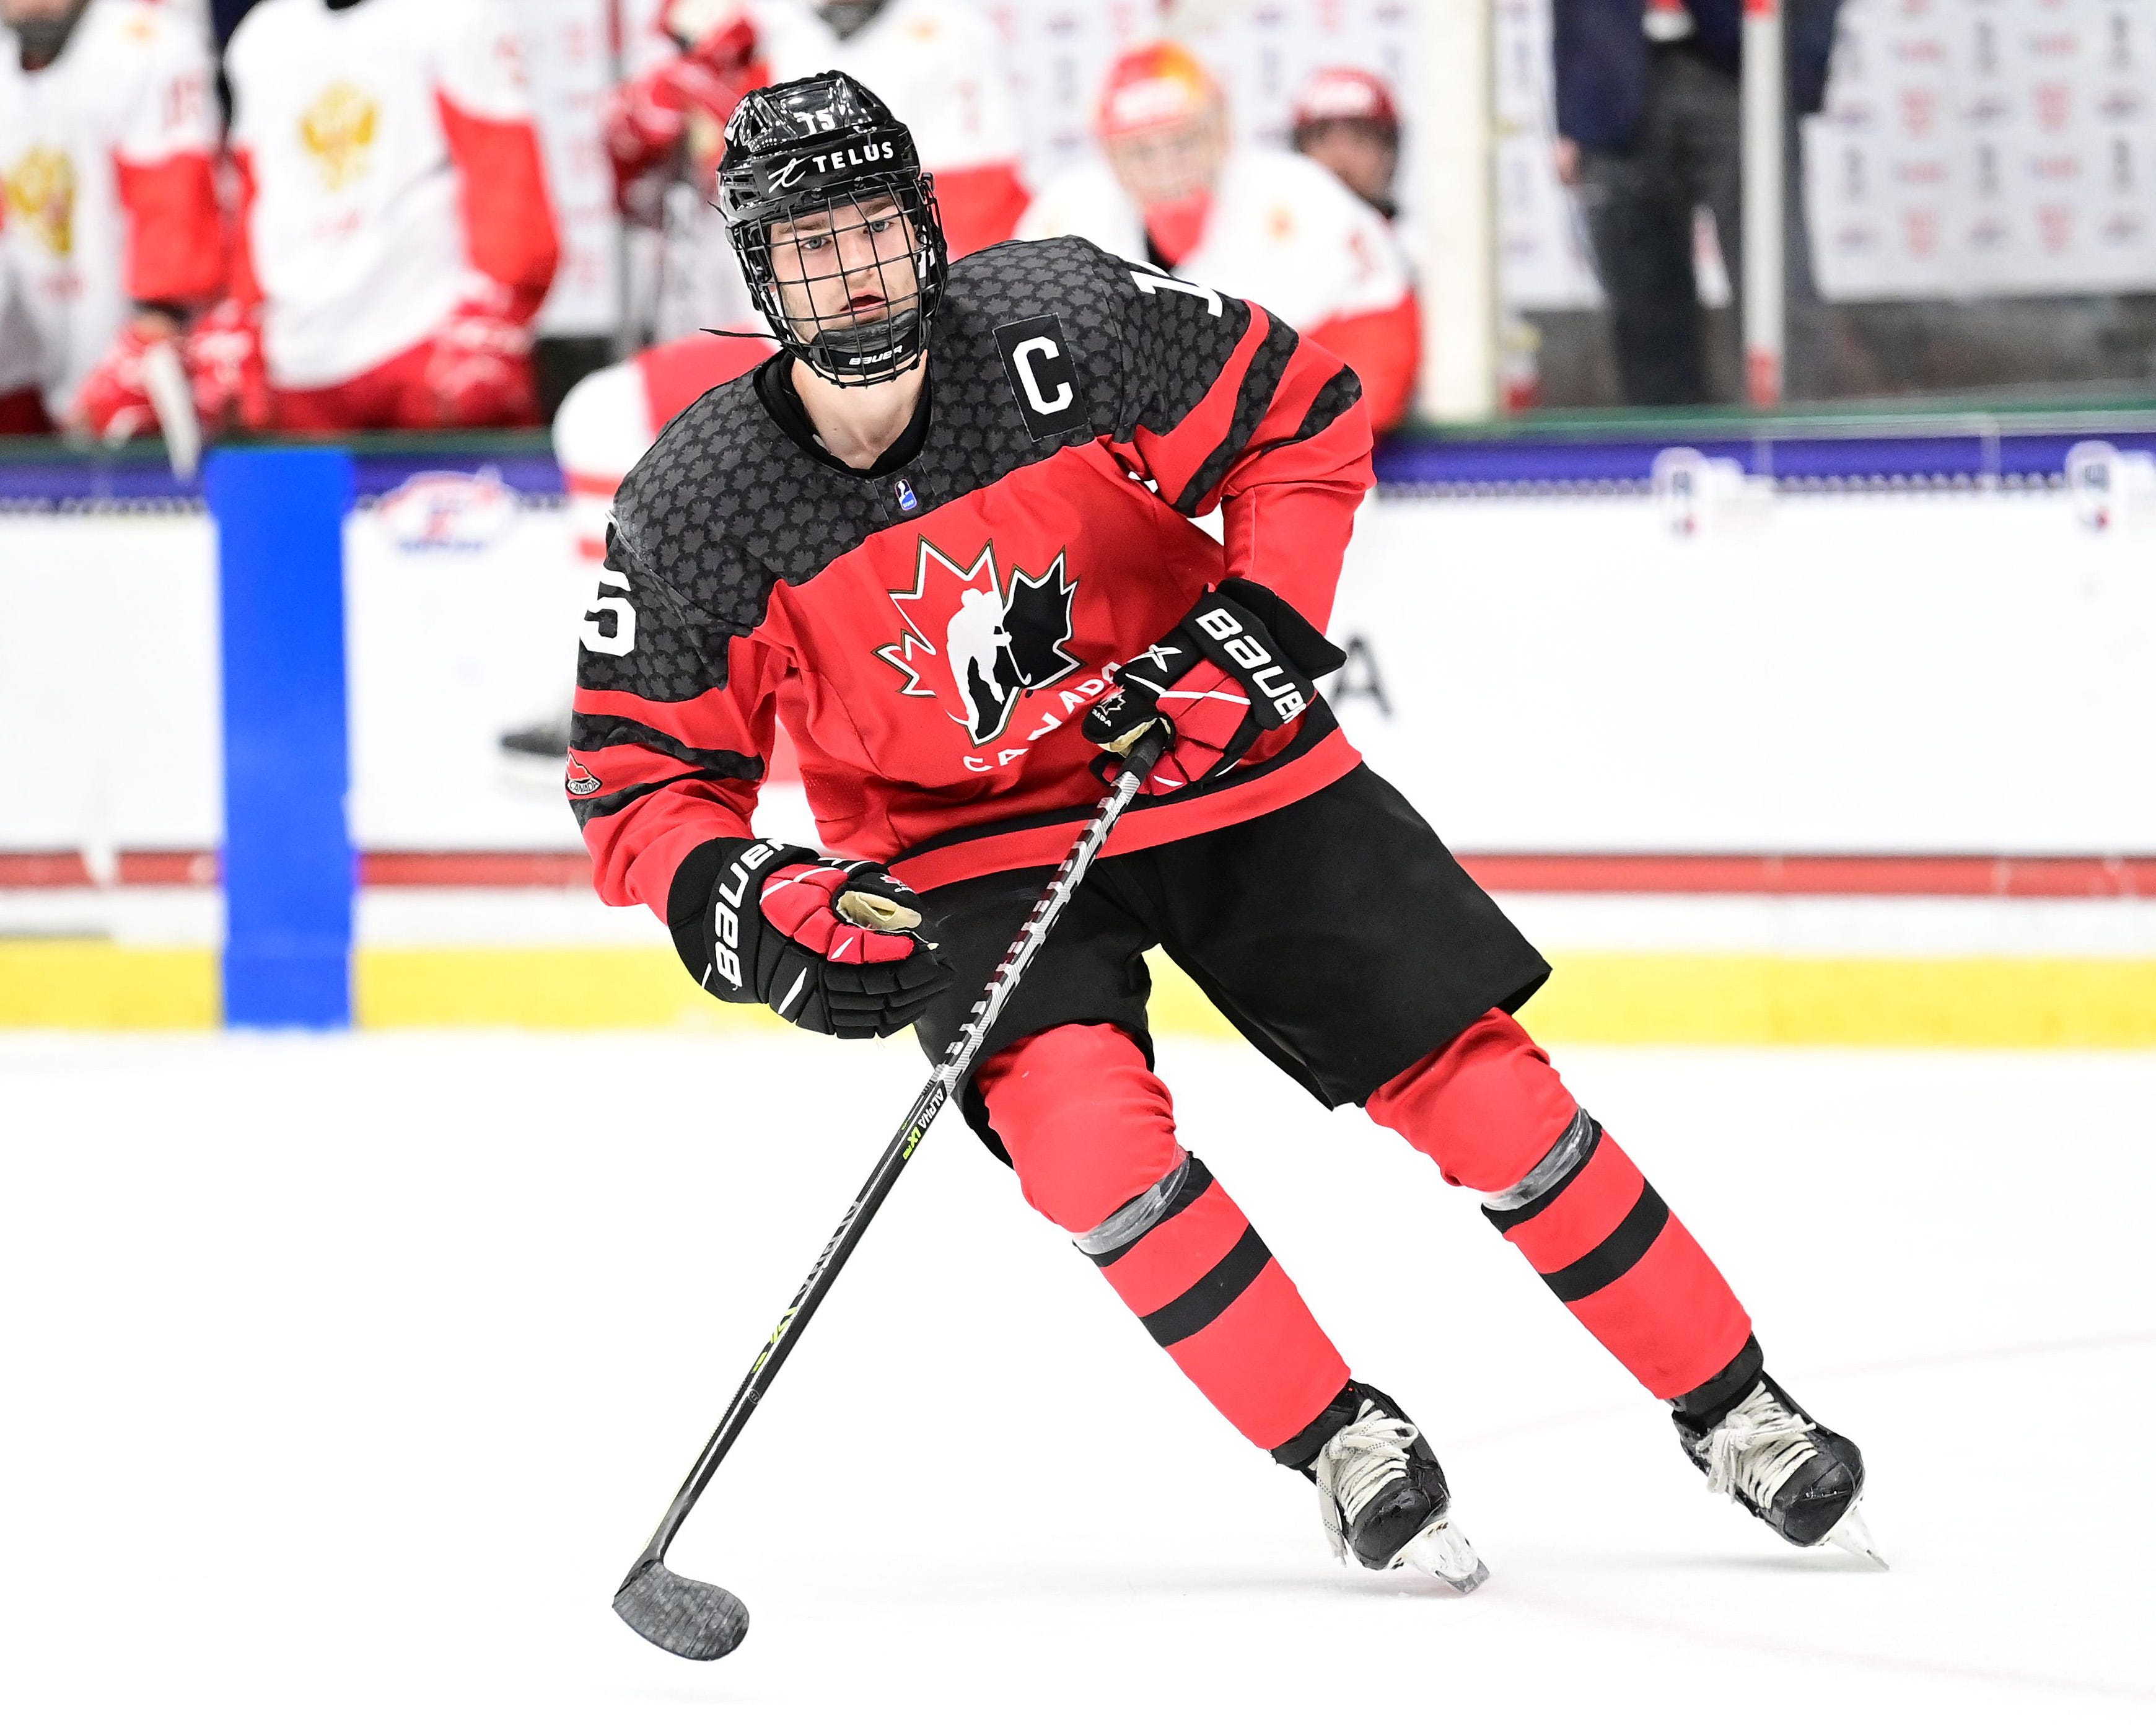 2022 NHL Draft Preview: USHL Looks to Continue Success at Draft